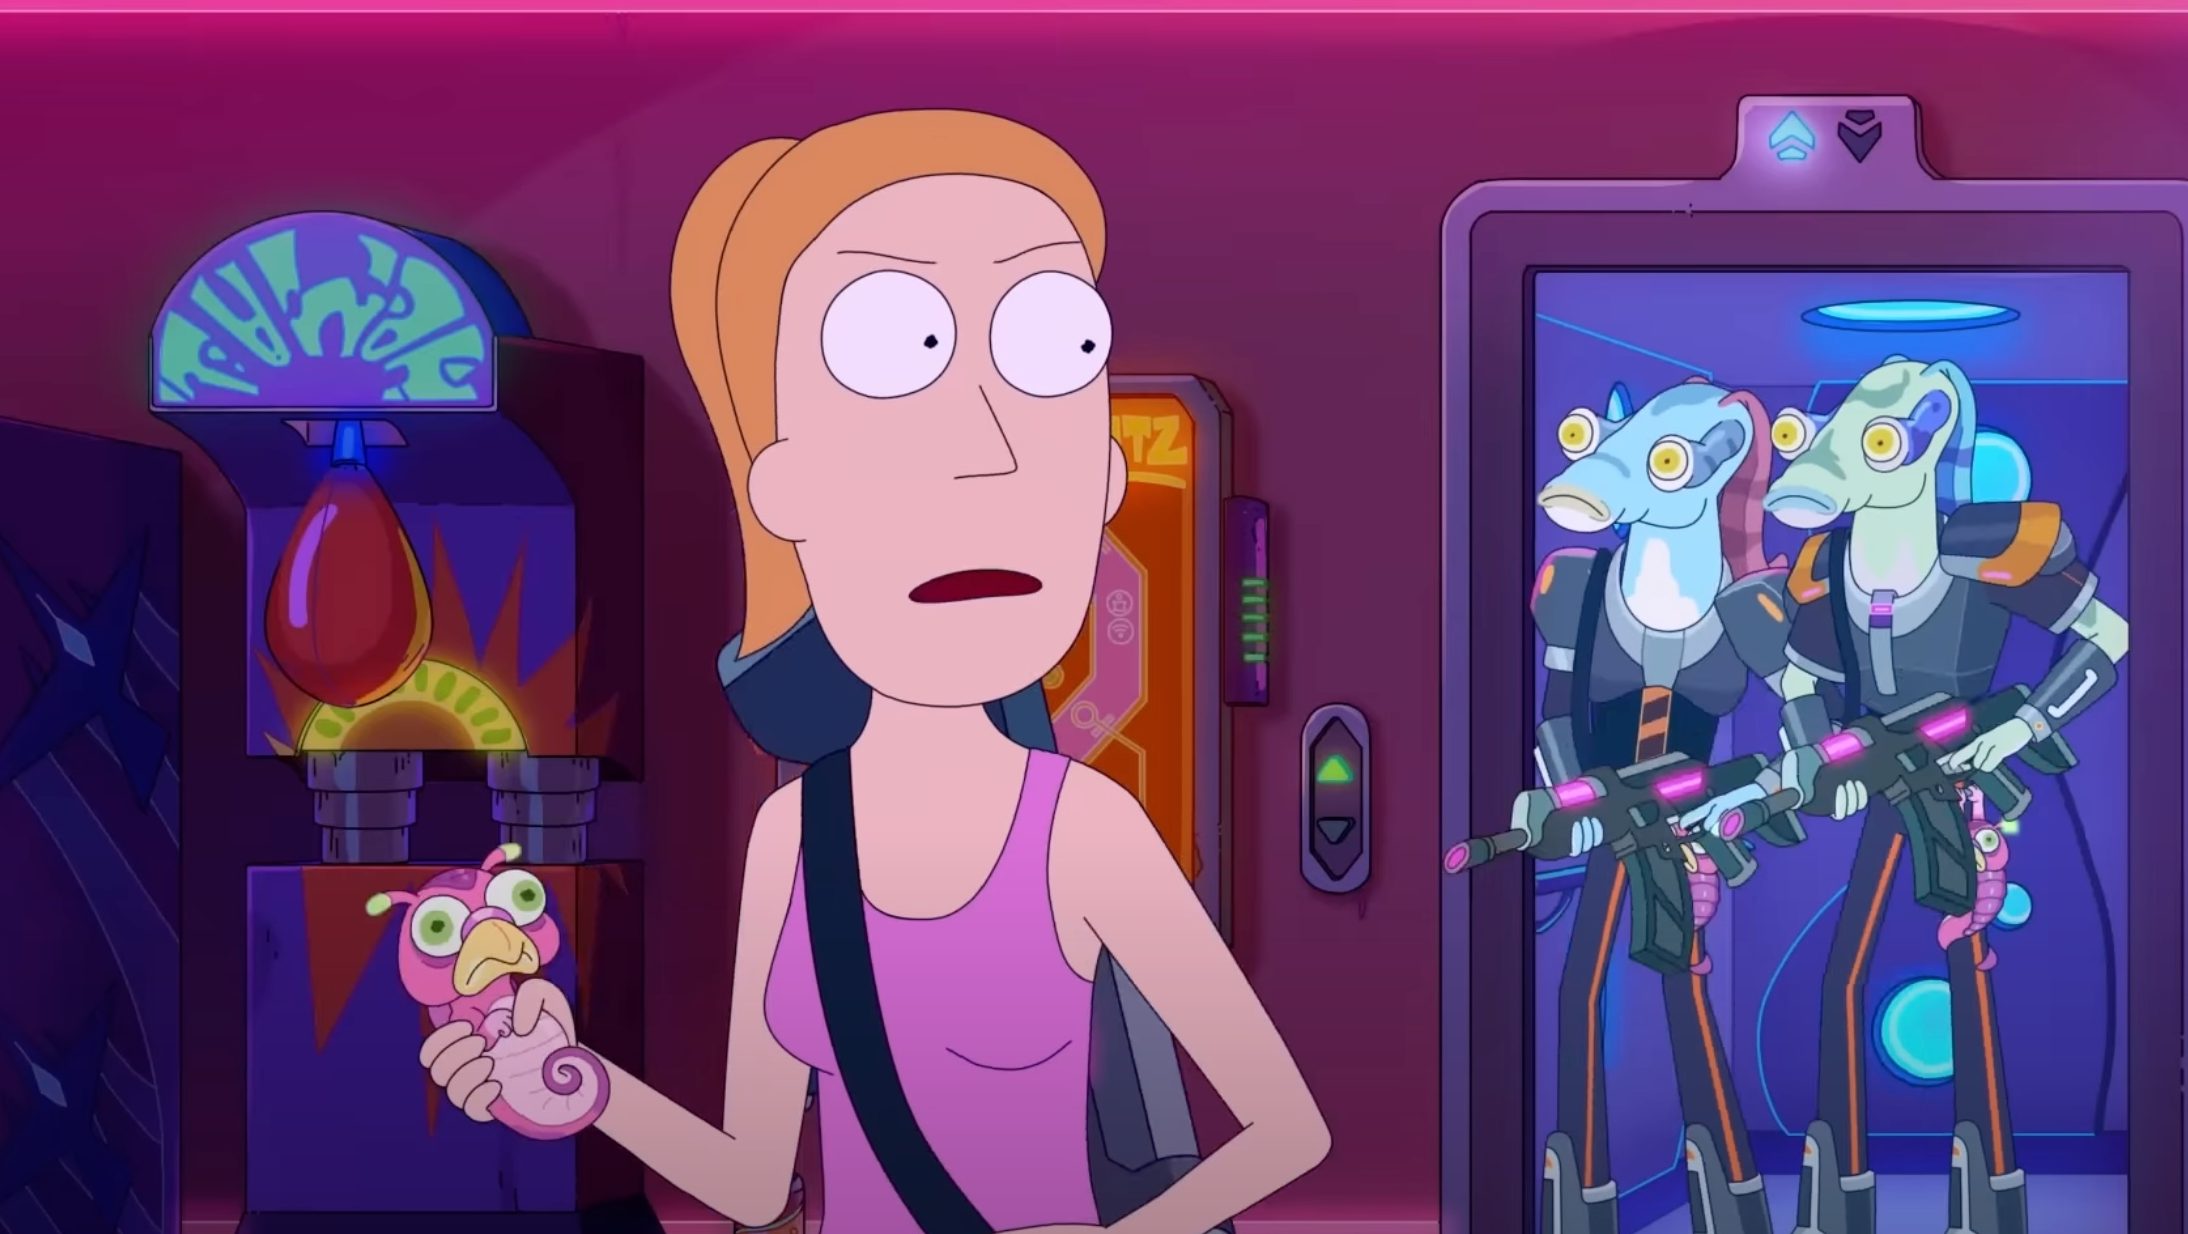 Is Rick and Morty Season 6 on AdultSwim or the App? Heavy